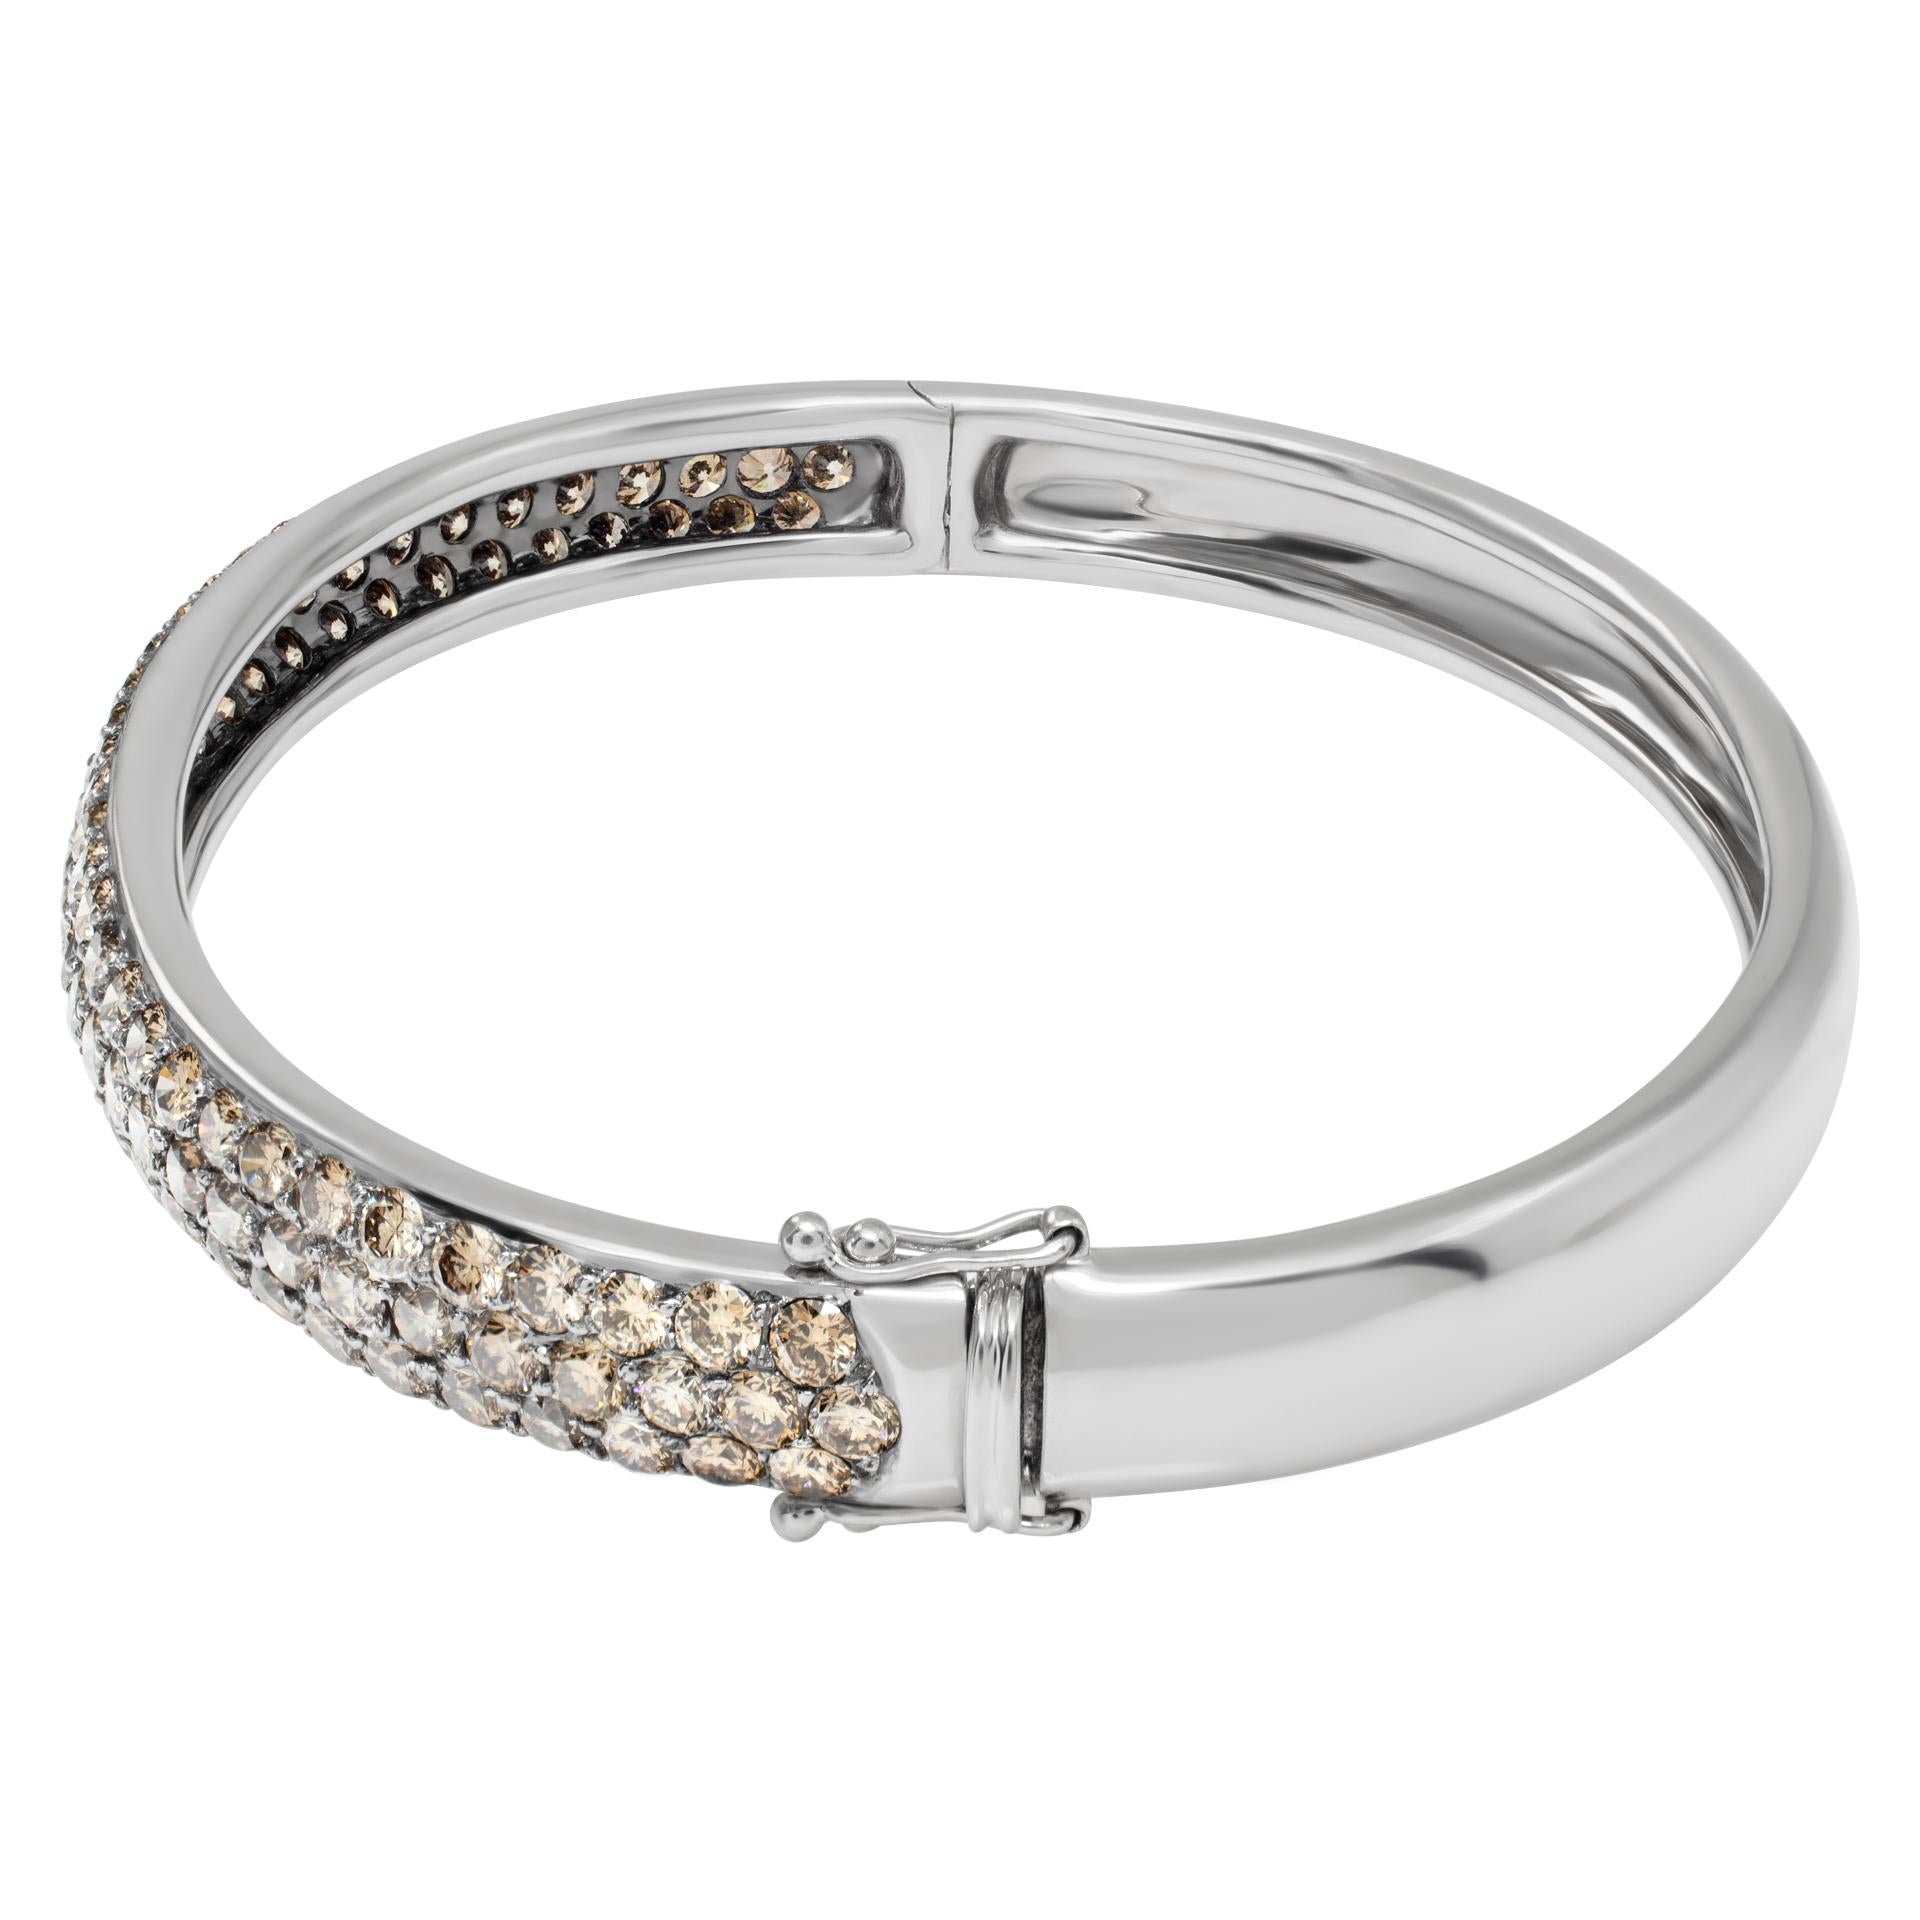 Bangle with brown diamonds in 18k white gold with approximately 4 carats in brown  color diamonds. Fits up to a 6- 7 inch wrist.
